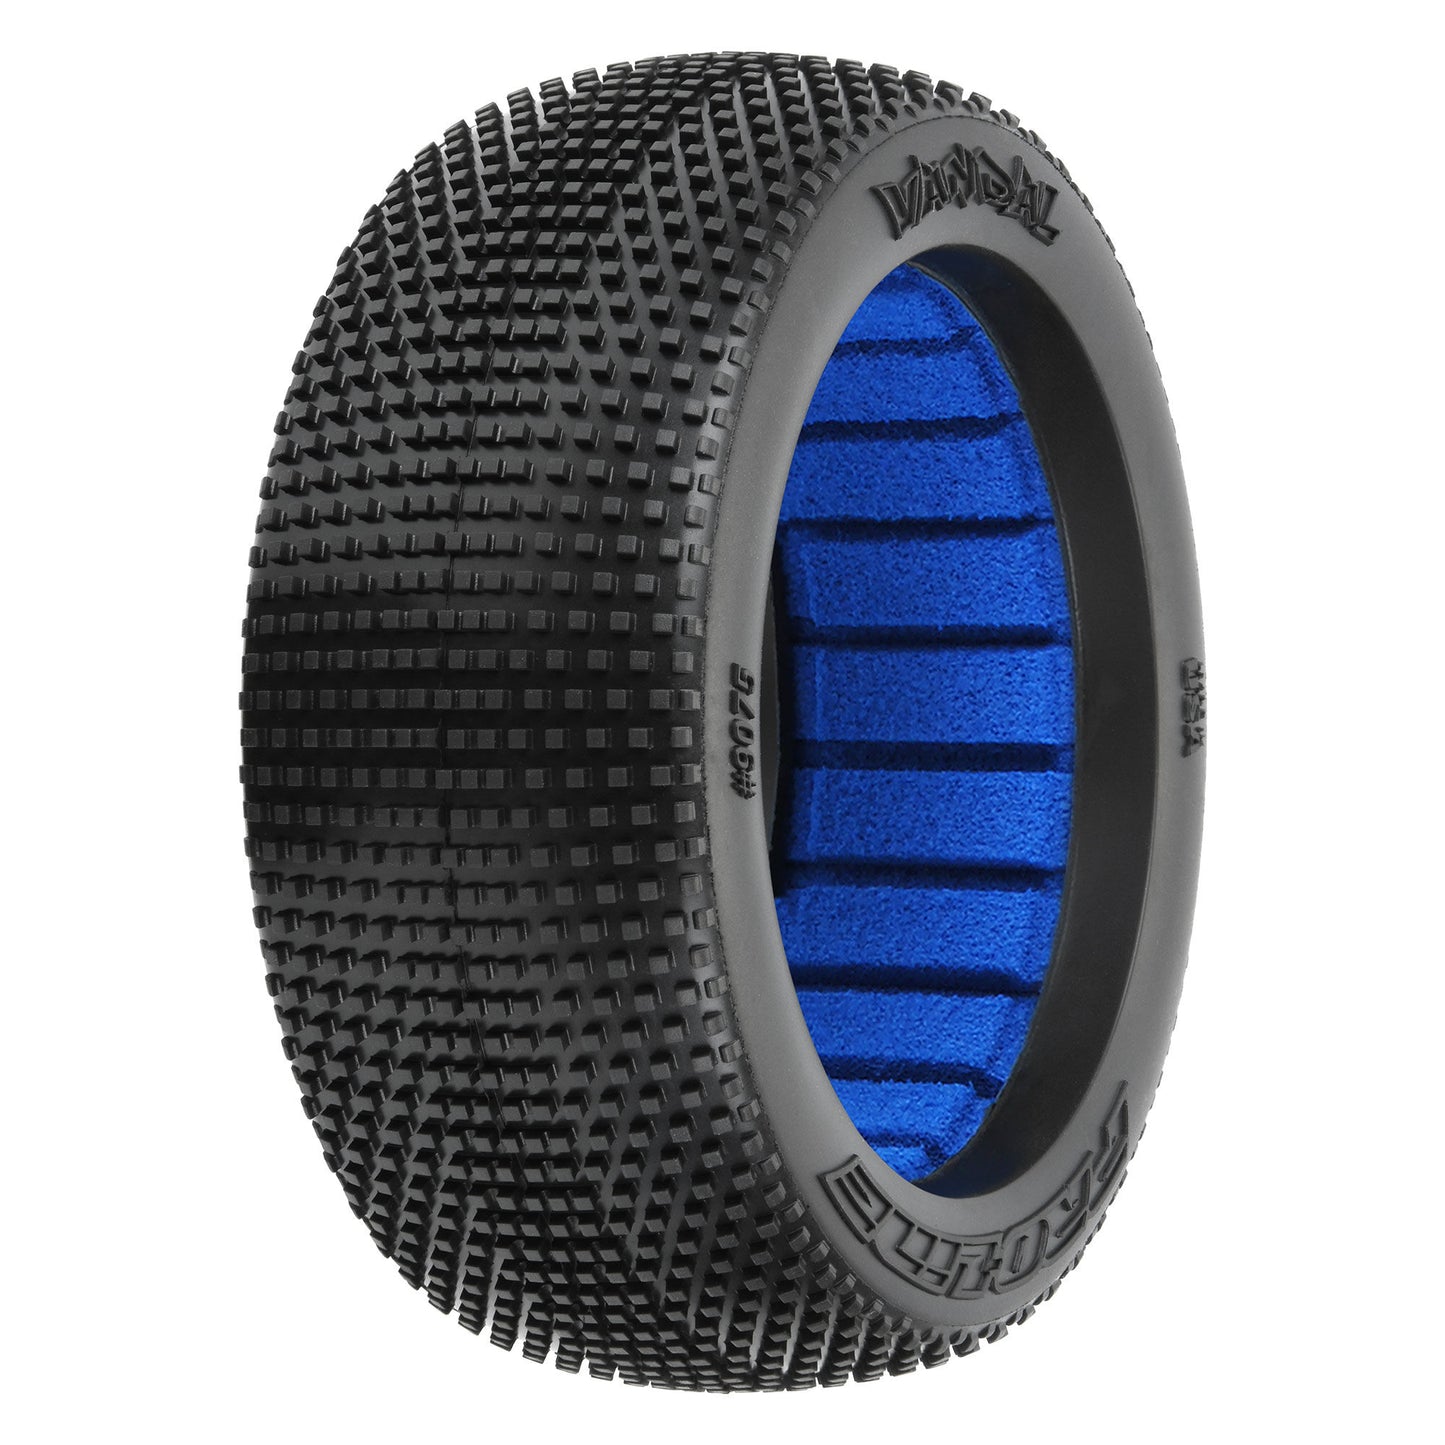 Pro-Line Racing PRO9075204 1:8 Vandal S4 F/R Off-Road Buggy Tires (Pack of 2)